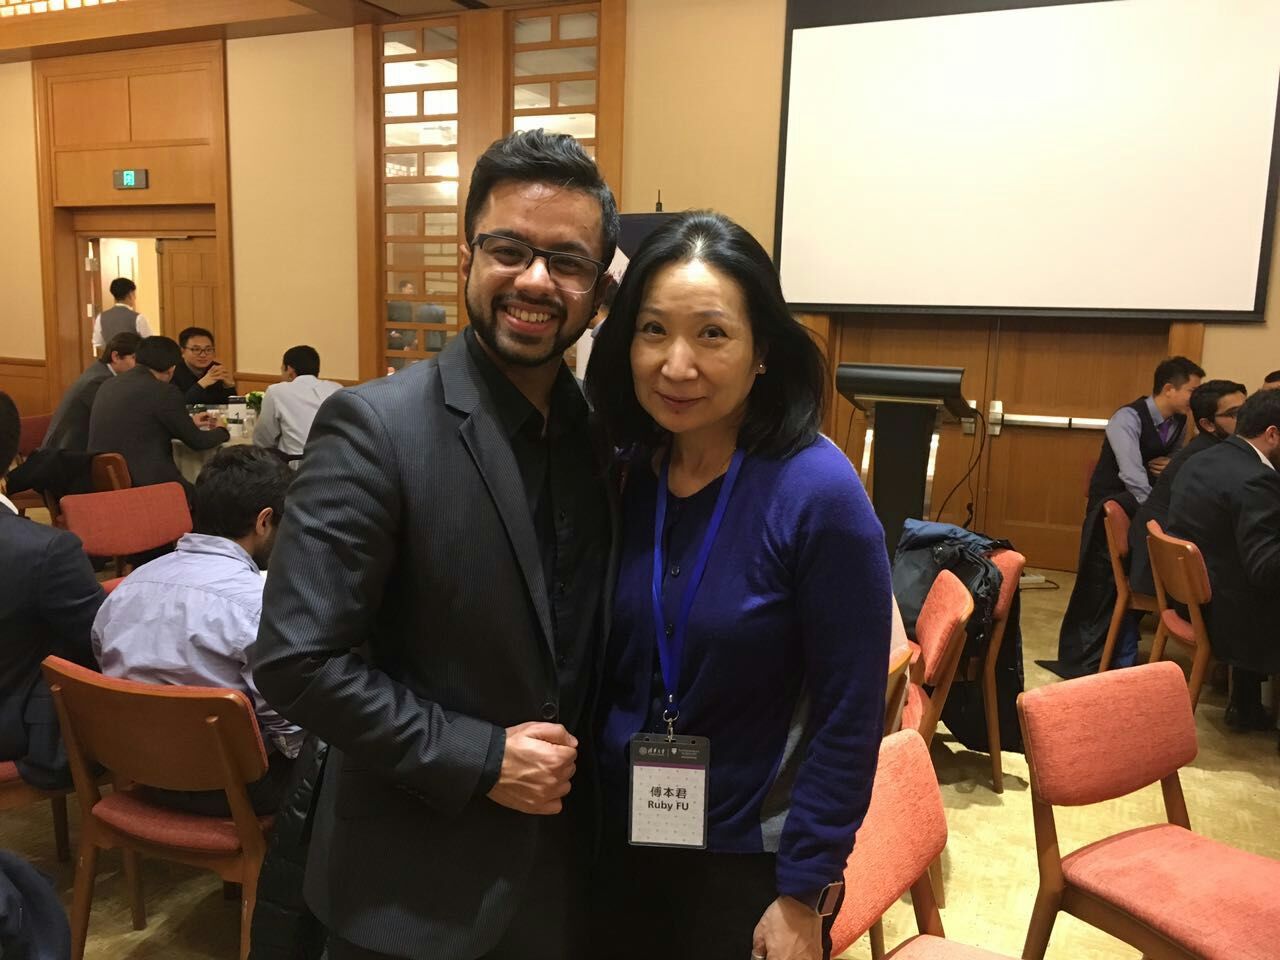 Anurag Ram Chandran on Twitter: "So to have @B_M China's CEO and all around inspirational power woman Ruby Fu as my mentor in #SchwarzmanScholars https://t.co/kd0ybncm7K" /